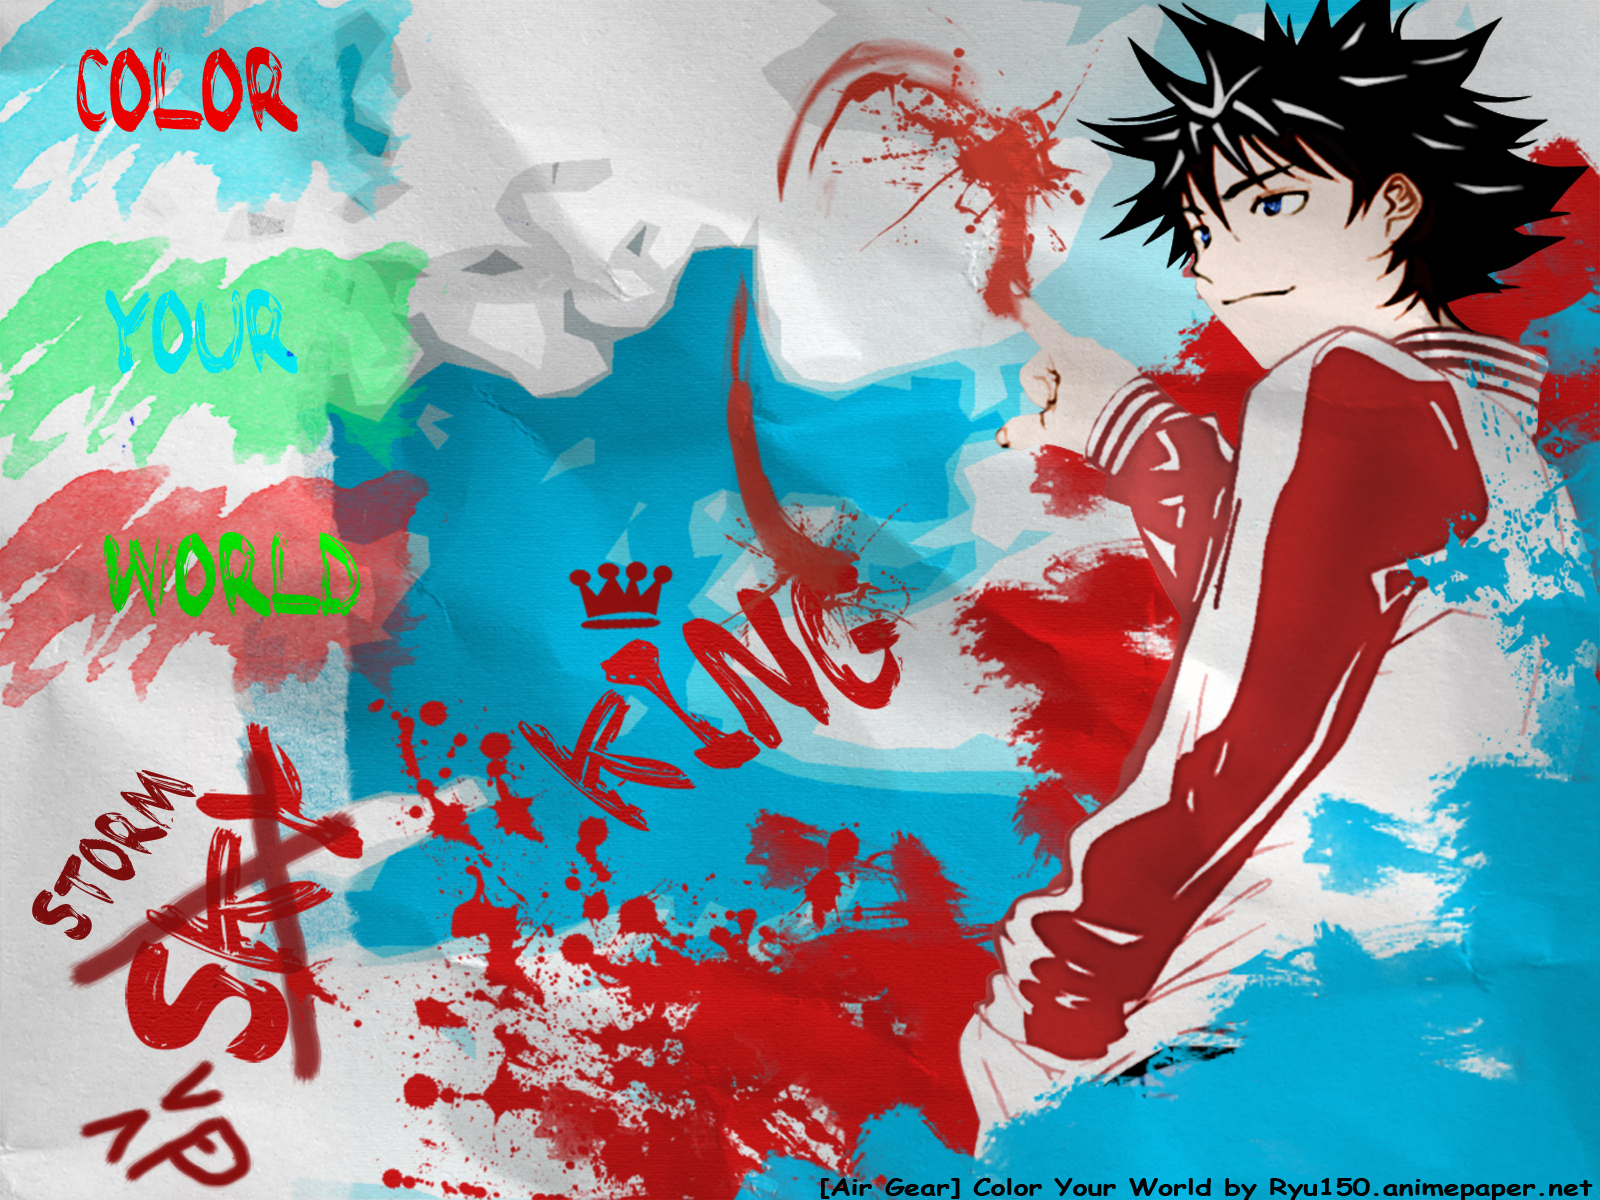 Air Gear anime-inspired desktop wallpaper. Vibrant illustration of characters performing high-flying stunts.